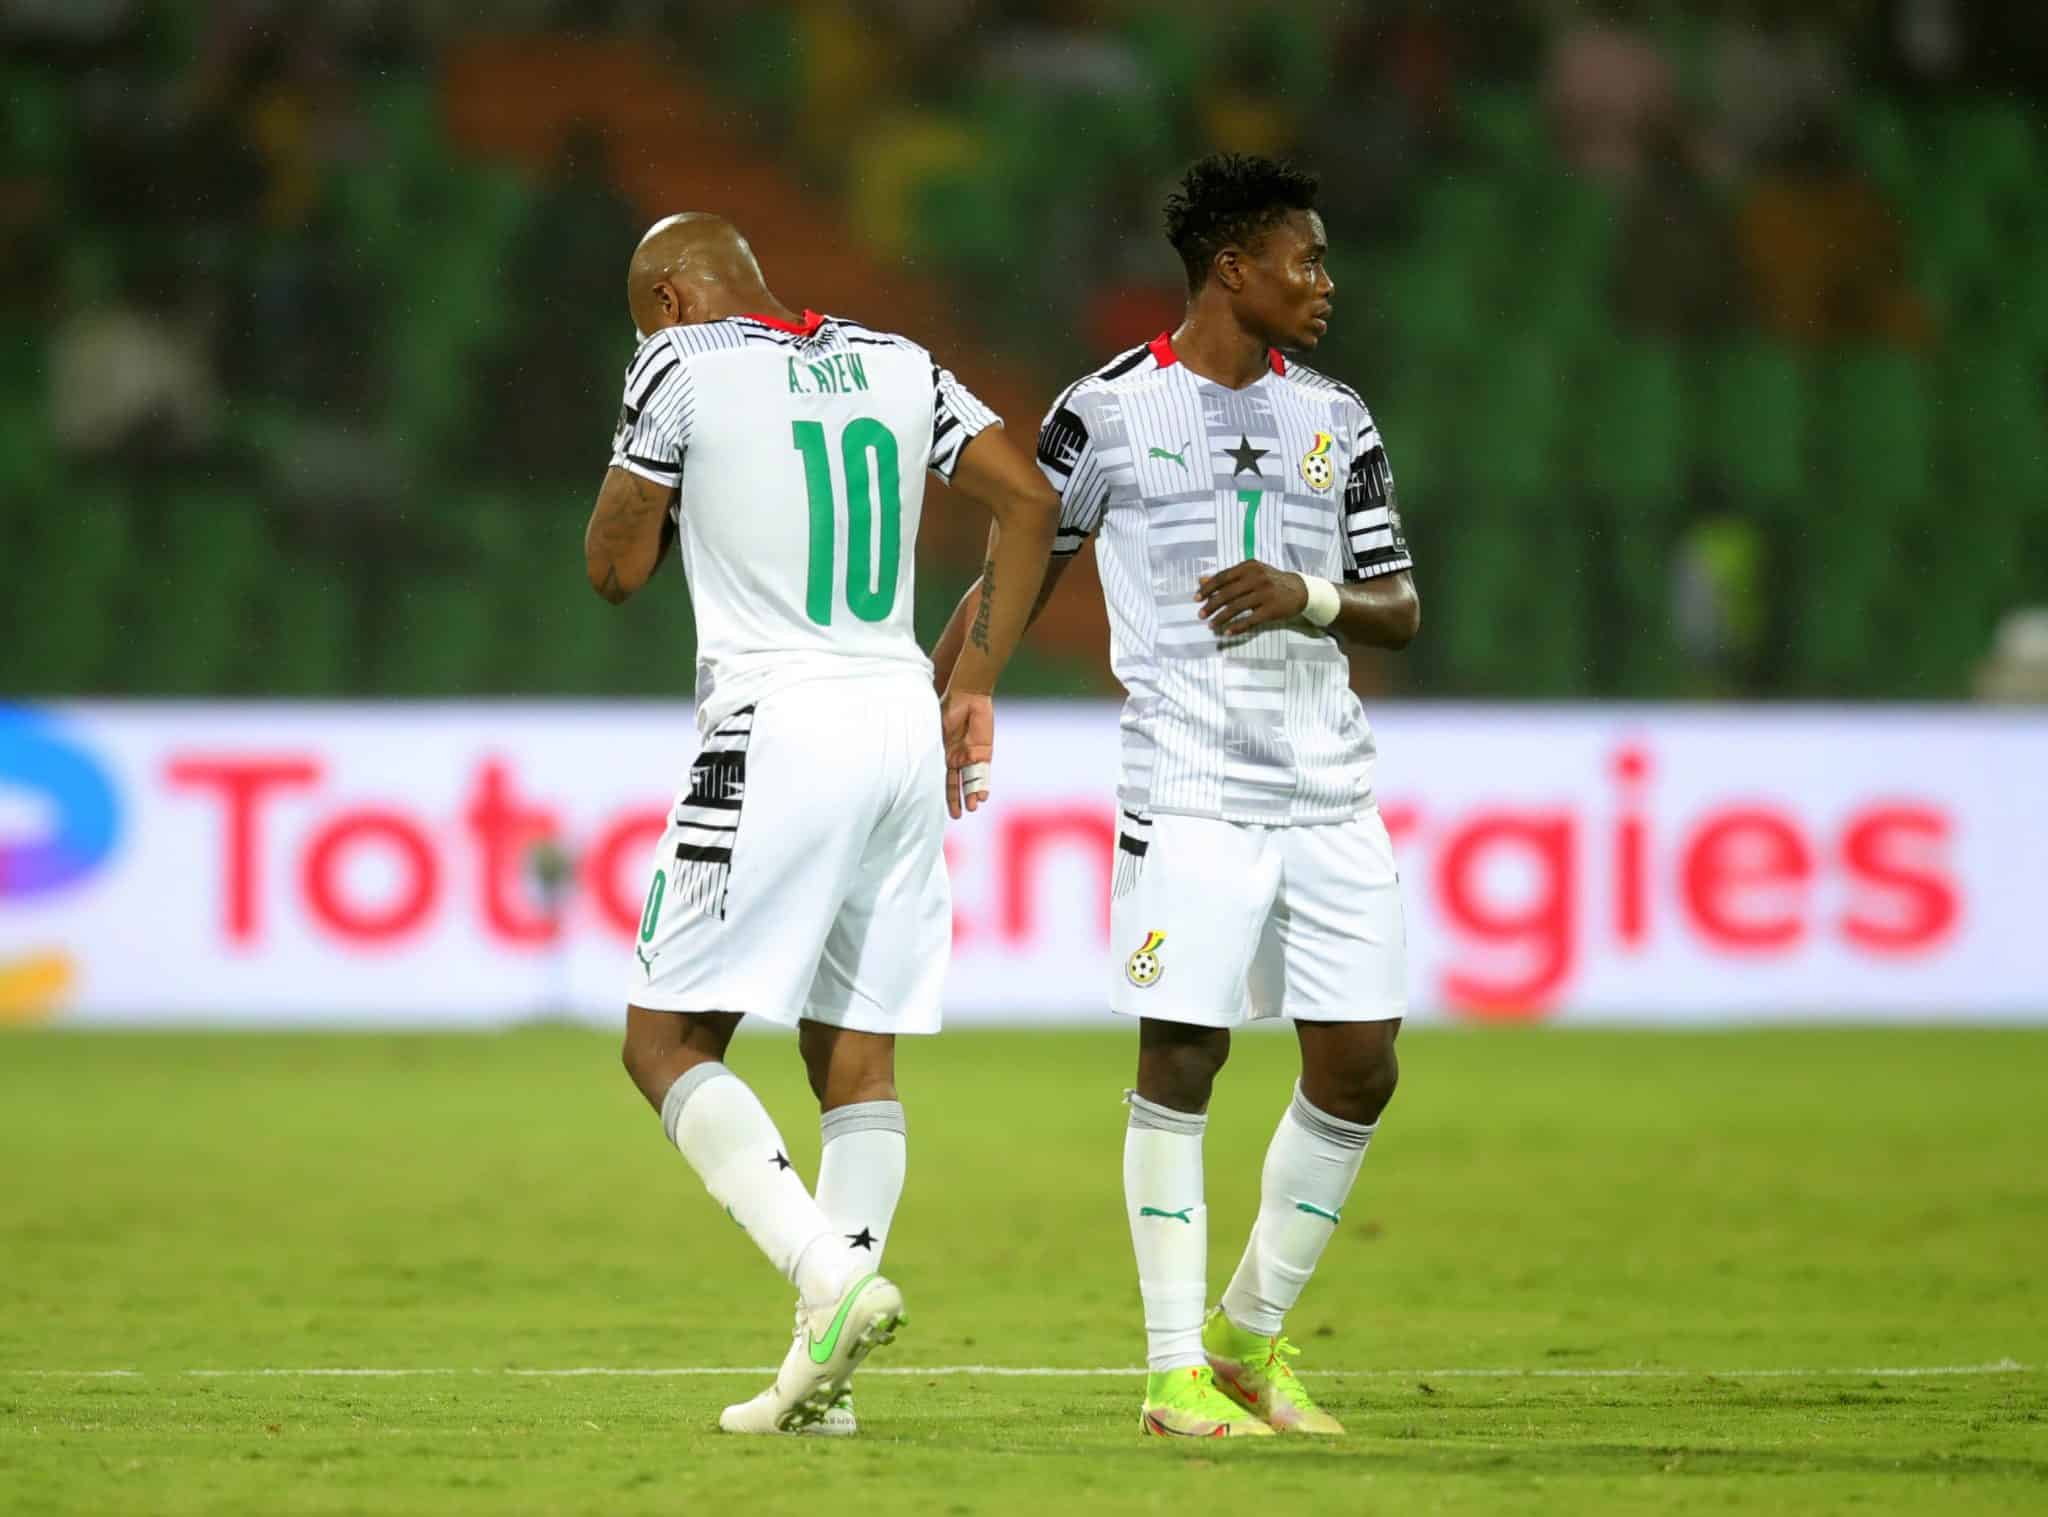 AFCON GHANA KNOCKED OUT OF AFCON 2021 AFTER SURPRISING LOSS TO COMOROS